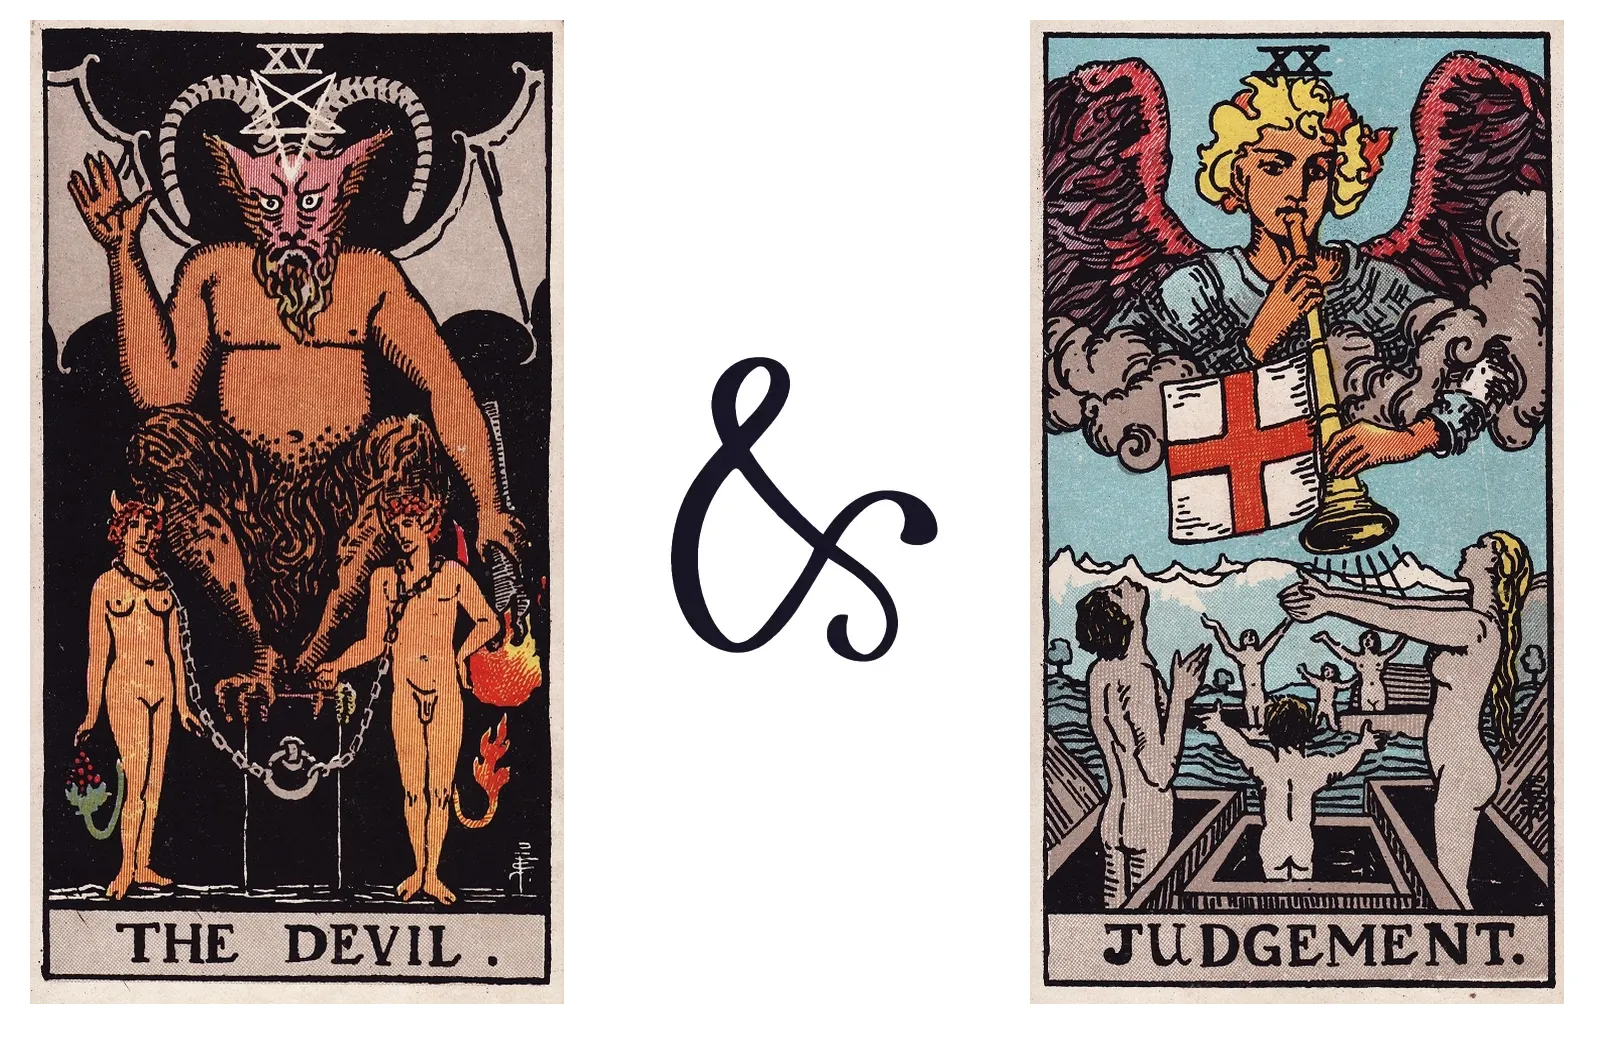 The Devil and Judgement